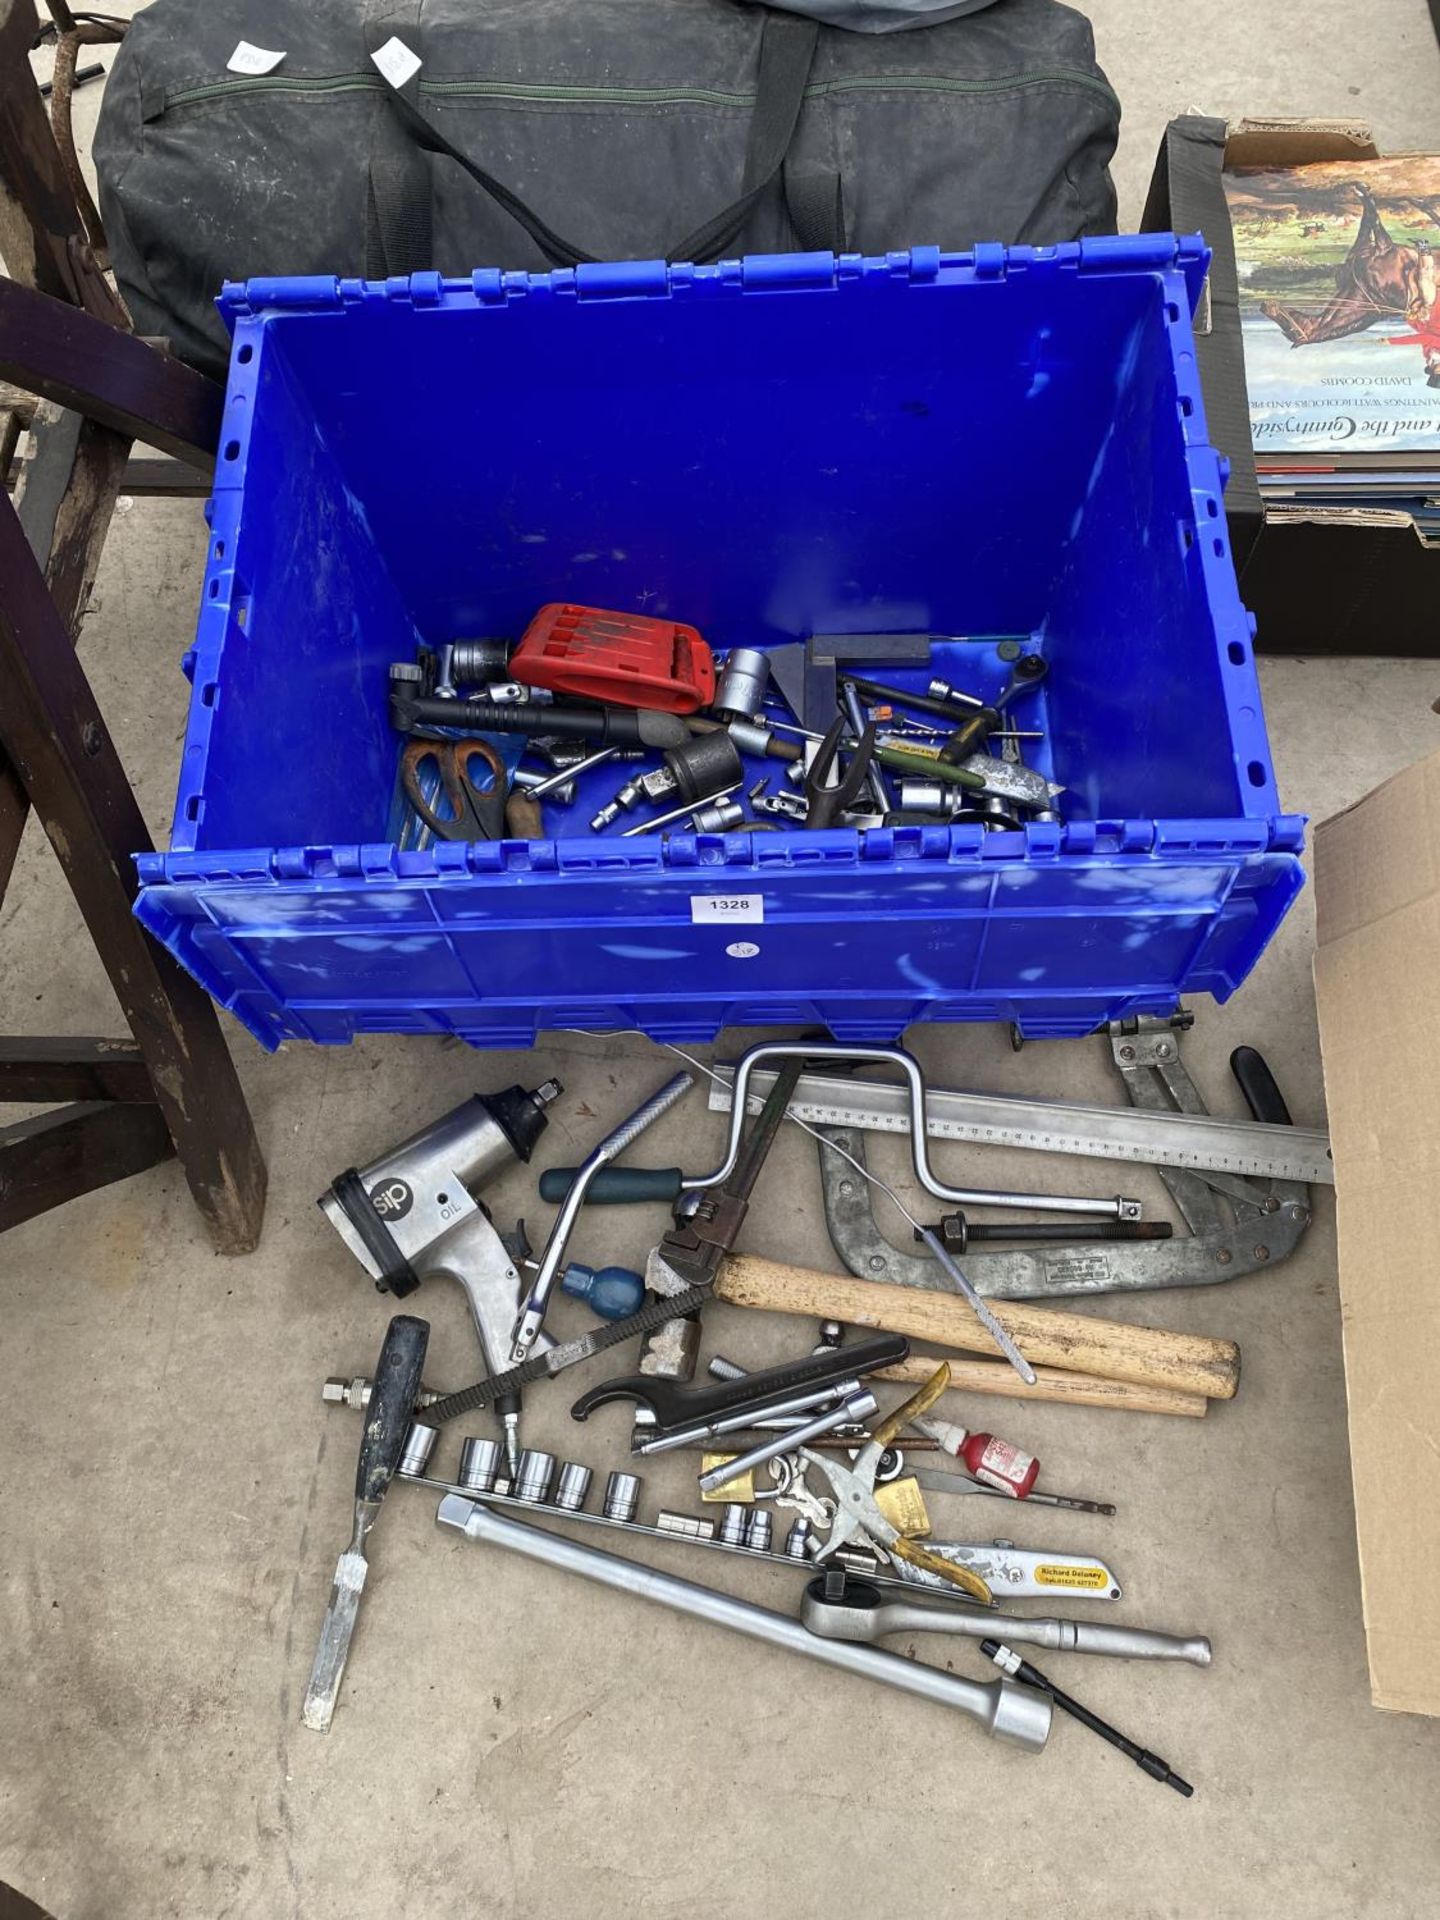 A LARGE ASSORTMENT OF TOOLS TO INCLUDE SOCKETS, A COMPRESSOR IMPACT WRENCH AND A LARGE CLAMP ETC